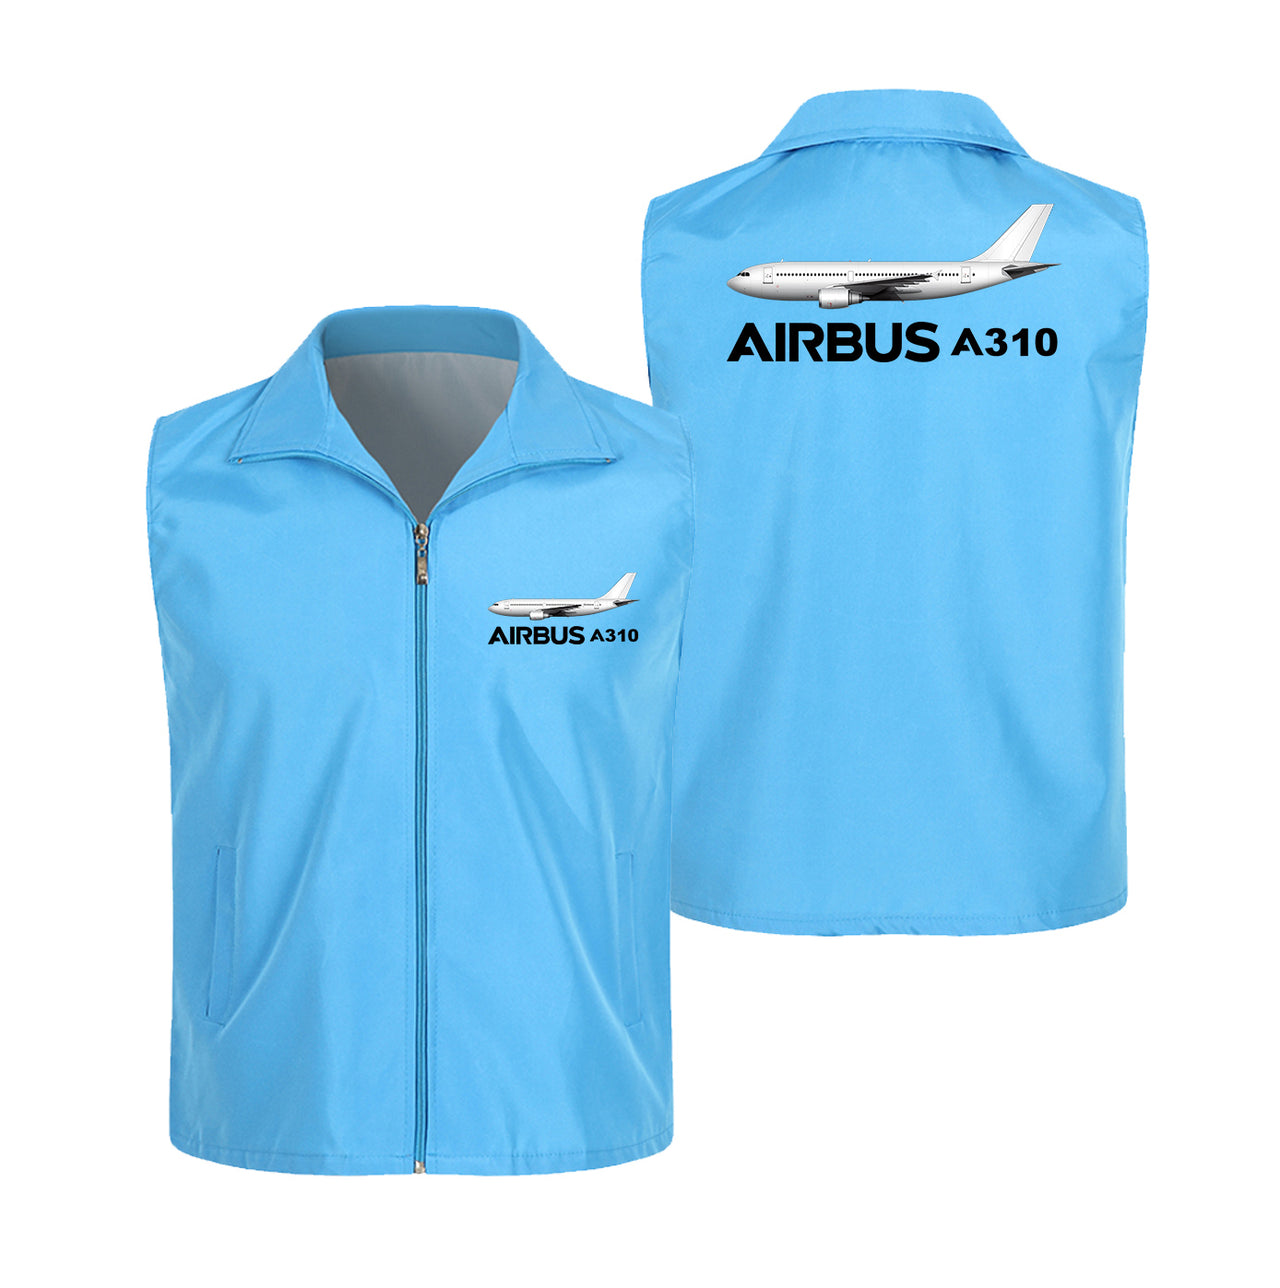 The Airbus A310 Designed Thin Style Vests